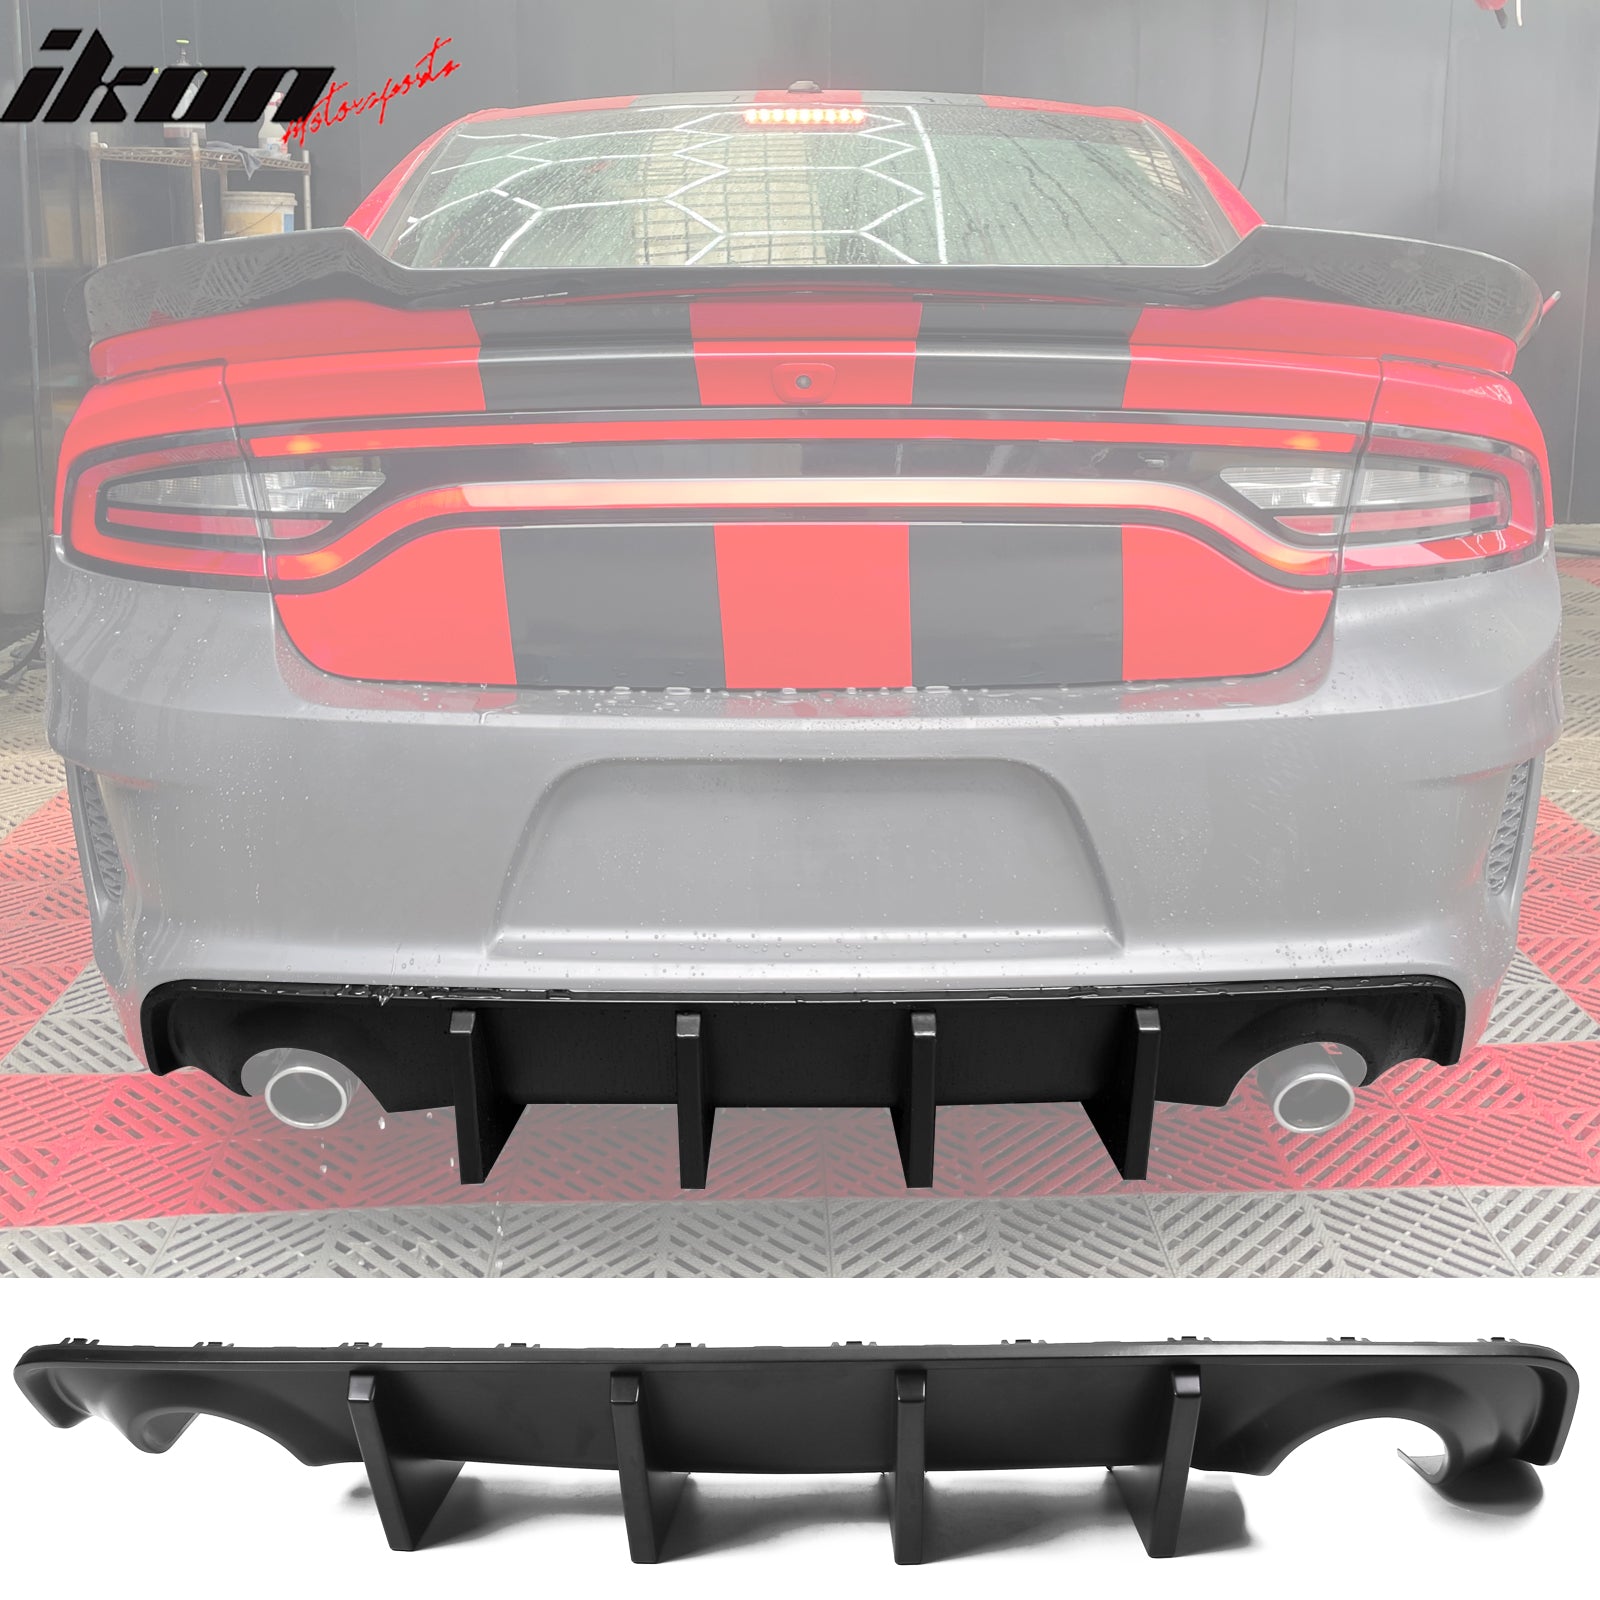 IKON MOTORSPORTS, Rear Diffuser Lip + Side Apron Spats Compatible With 2020-2023 Dodge Charger Widebody, IKON Style Rear Bumper Lip With 4 Fins Matte Black PP, 2021 2022